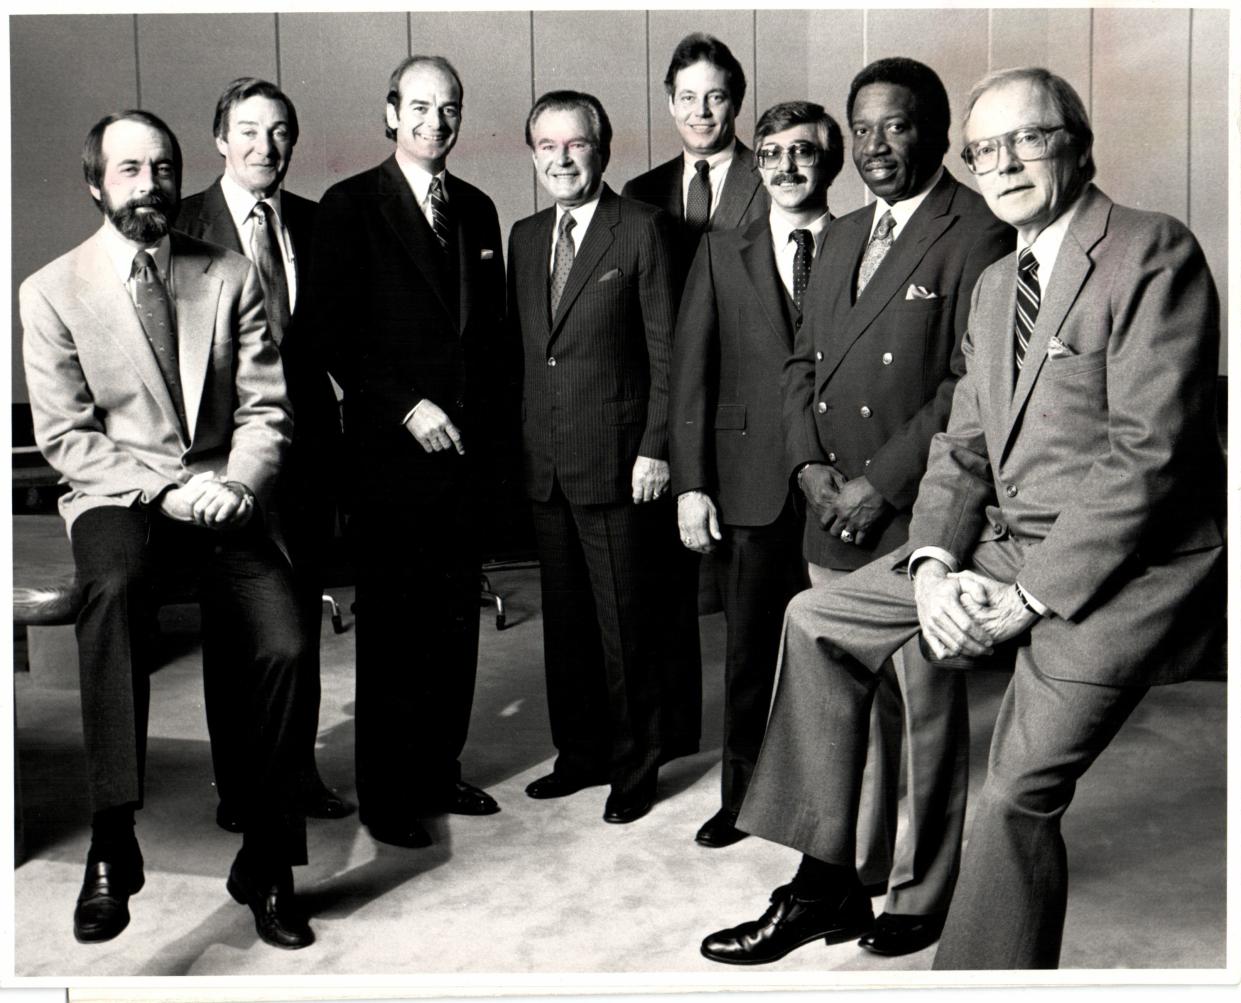 William R. Ritchie, third from left, with other committee members overseeing Detroit's auto show in 1984.